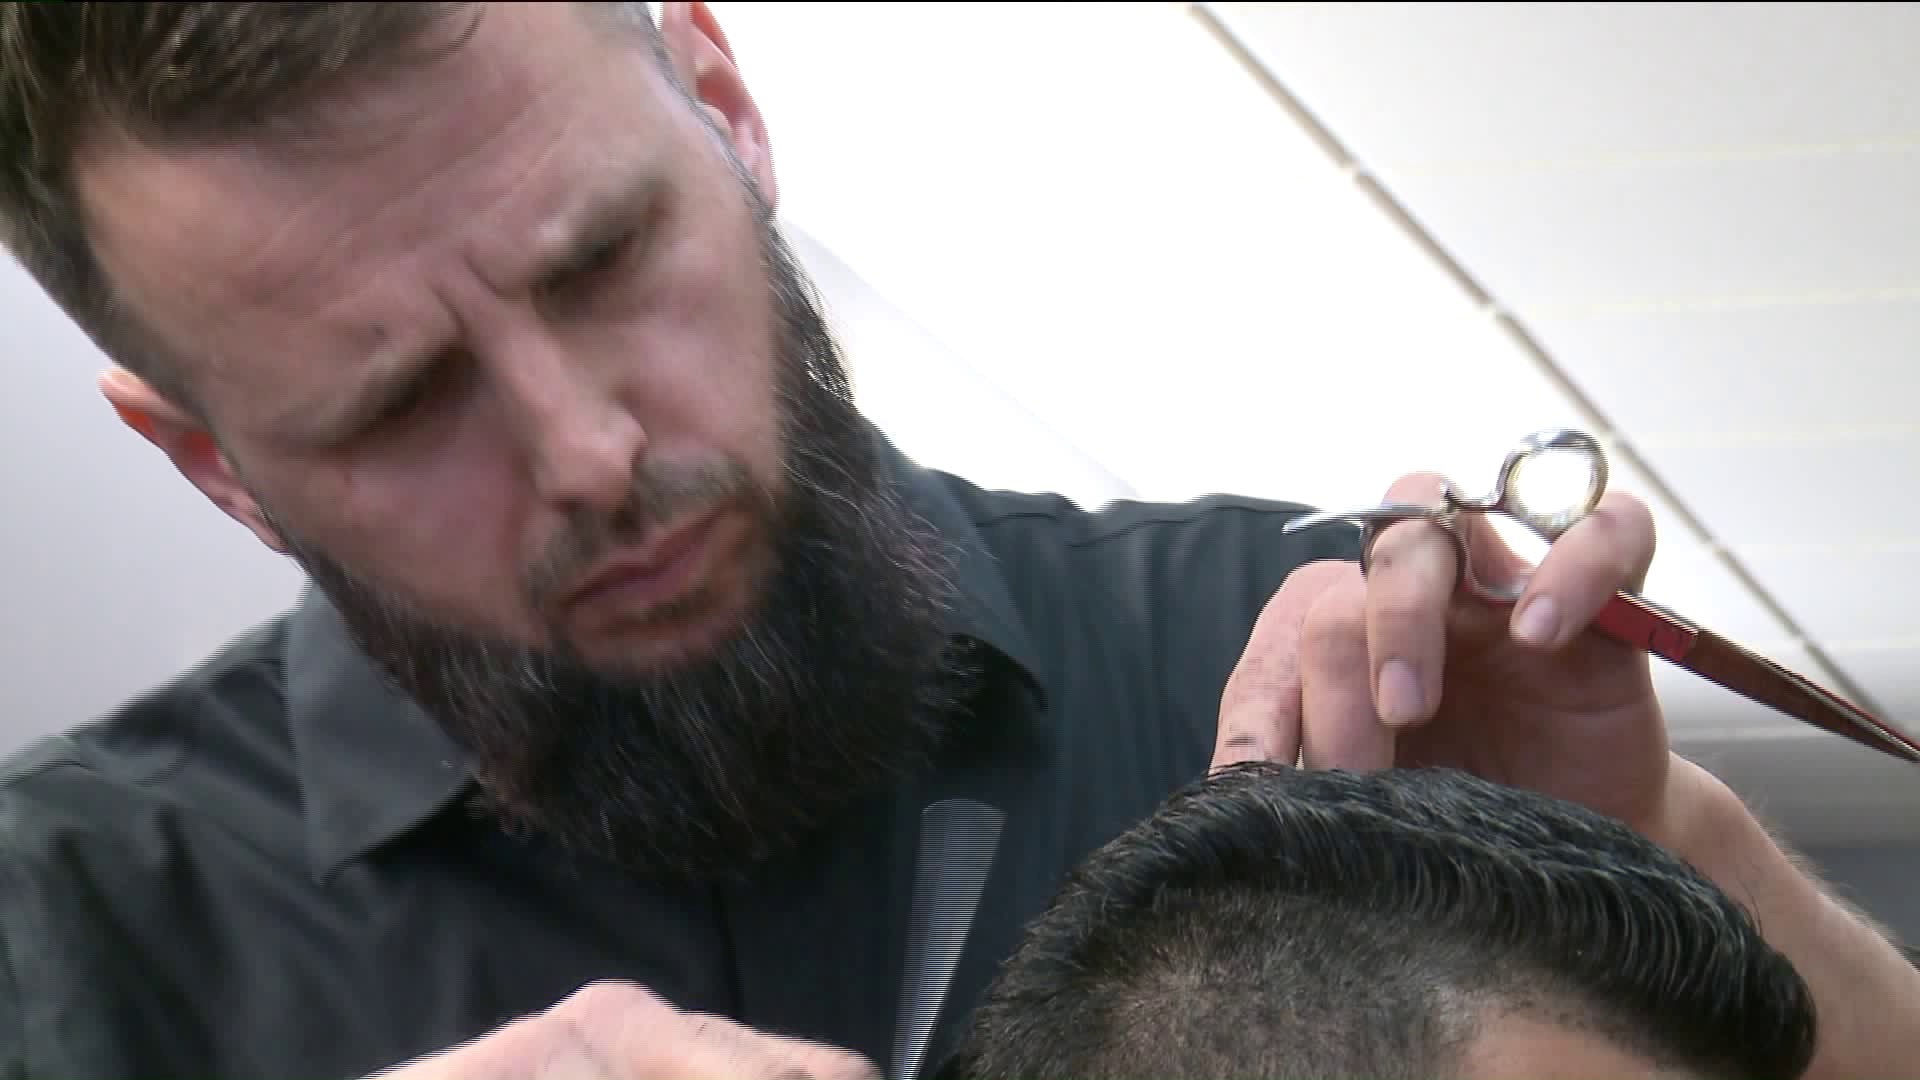 From refugee, to world champion barber